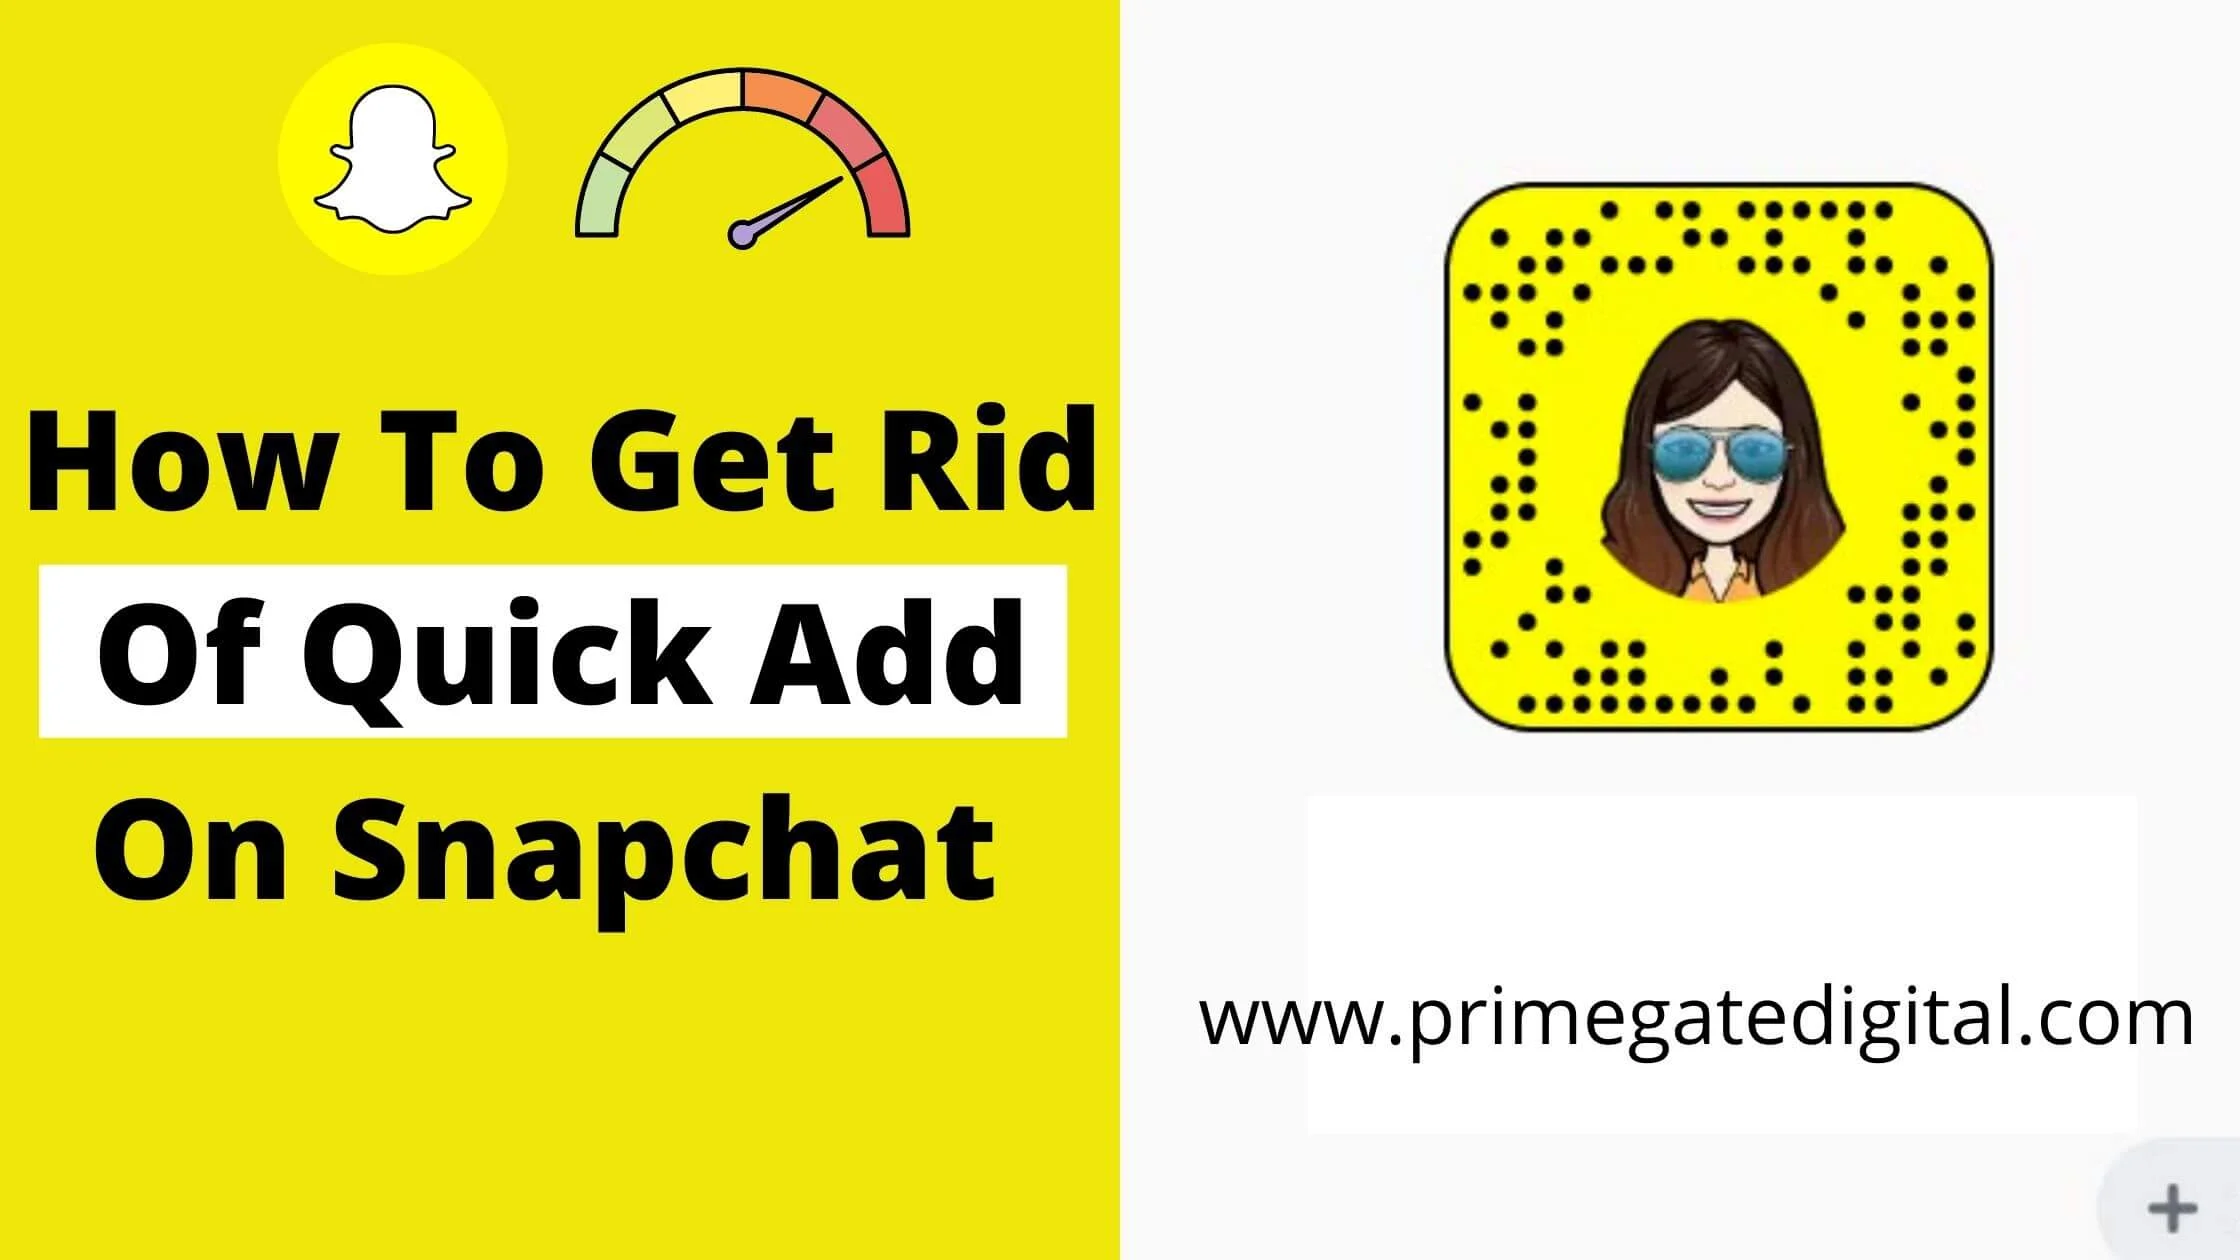 How To Get Rid Of Quick Add On Snapchat